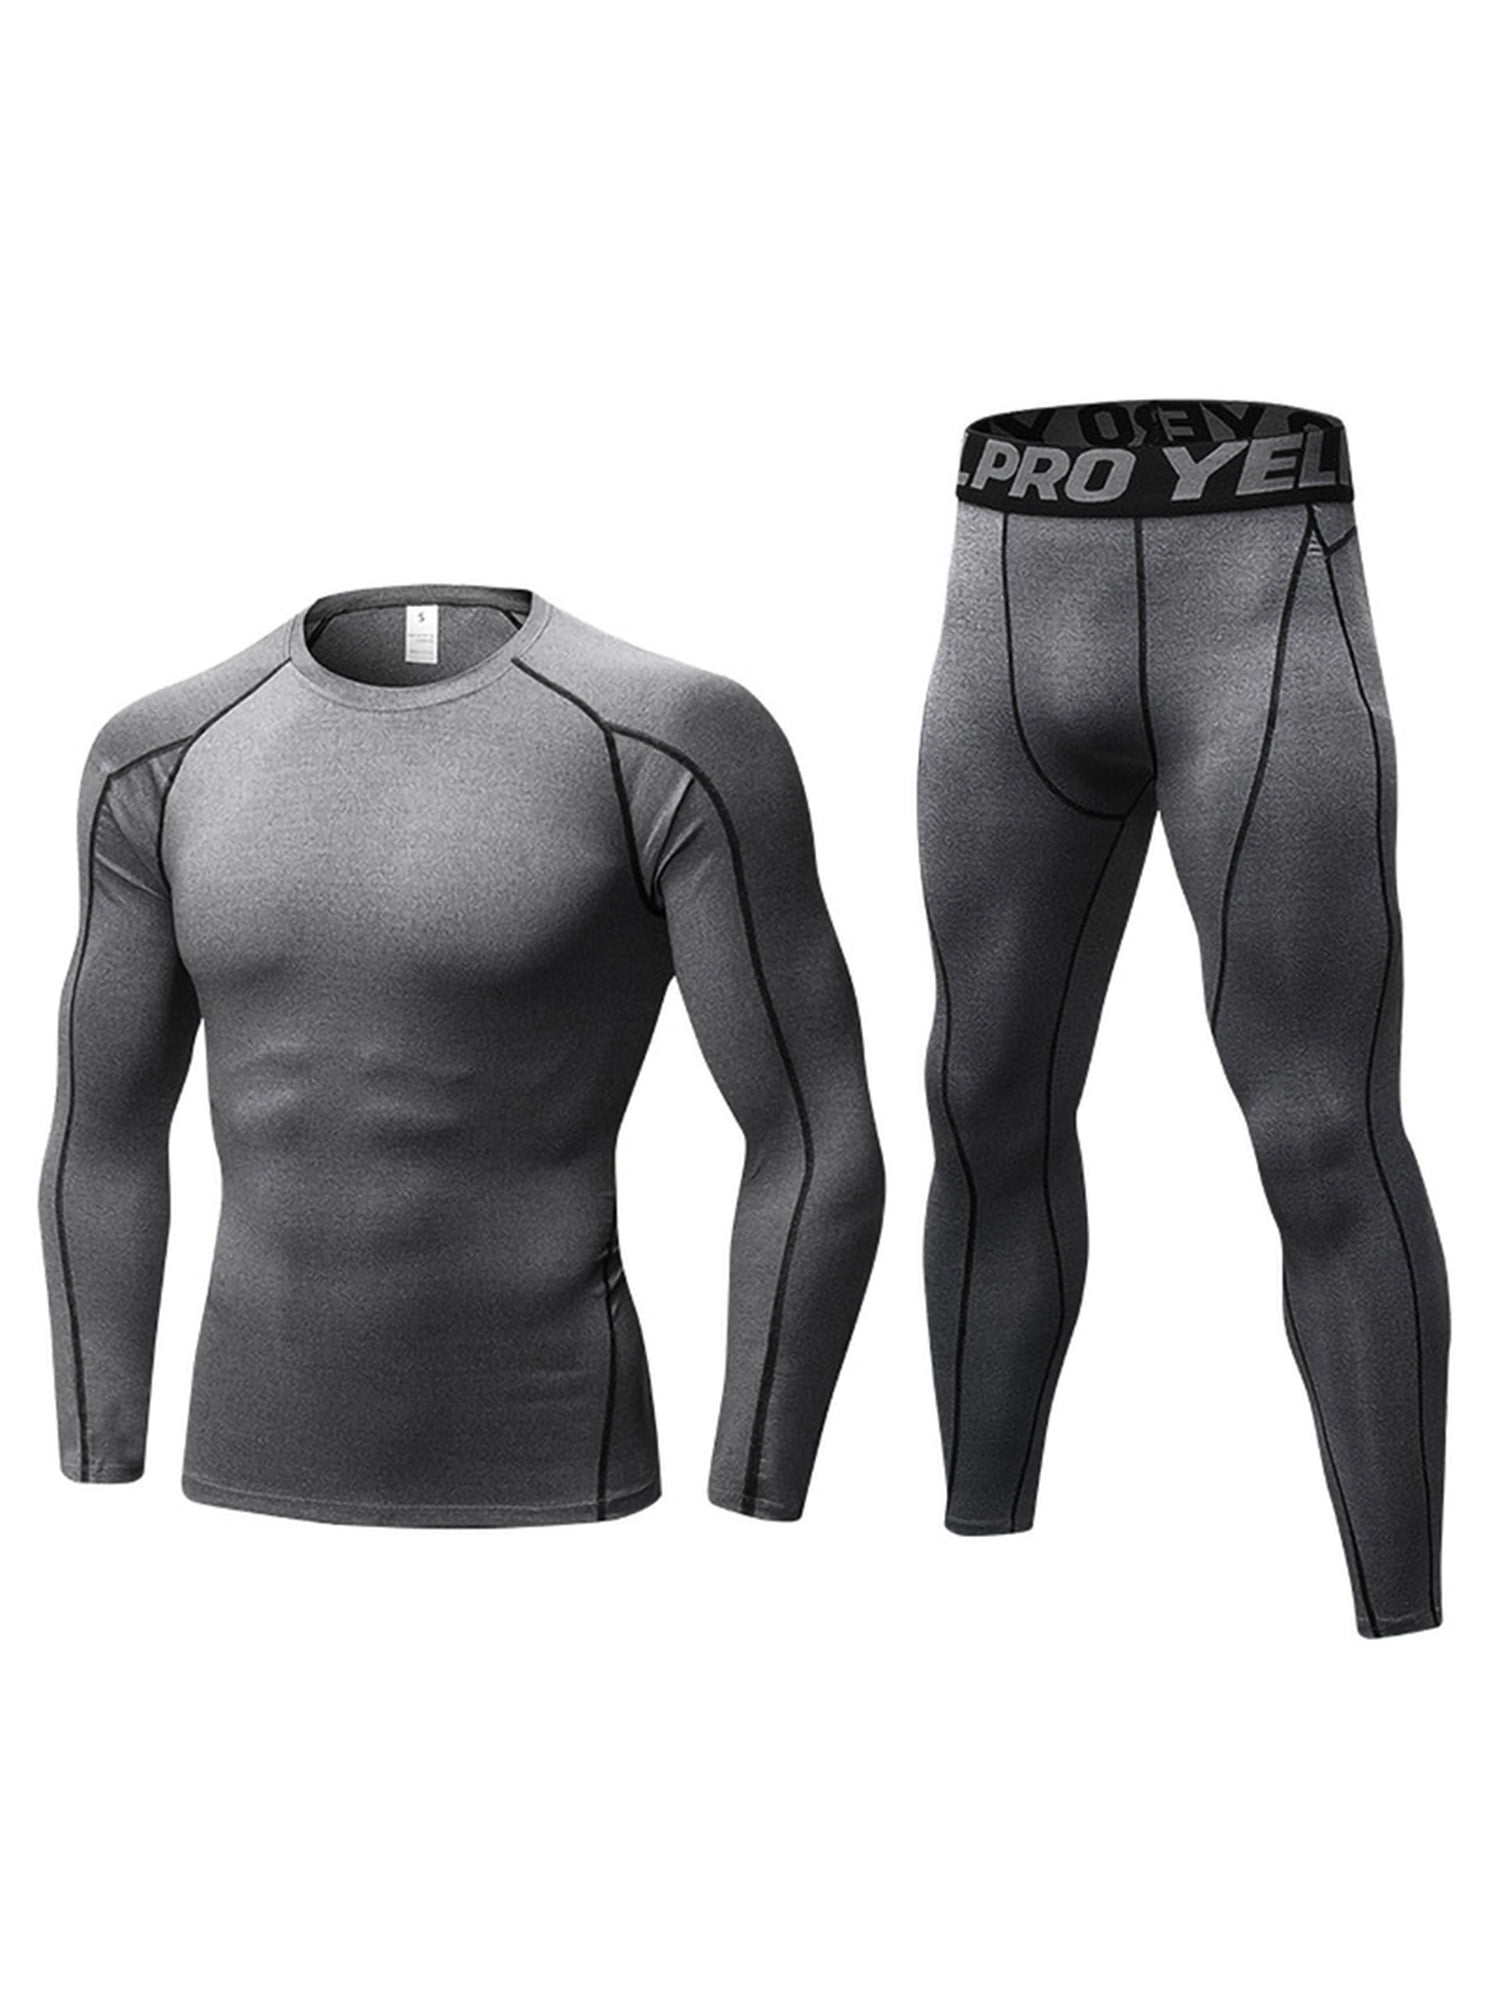 Mens Compression Base Layer Sport T-Shirt Gym Runing Workout Long Leggings Pants